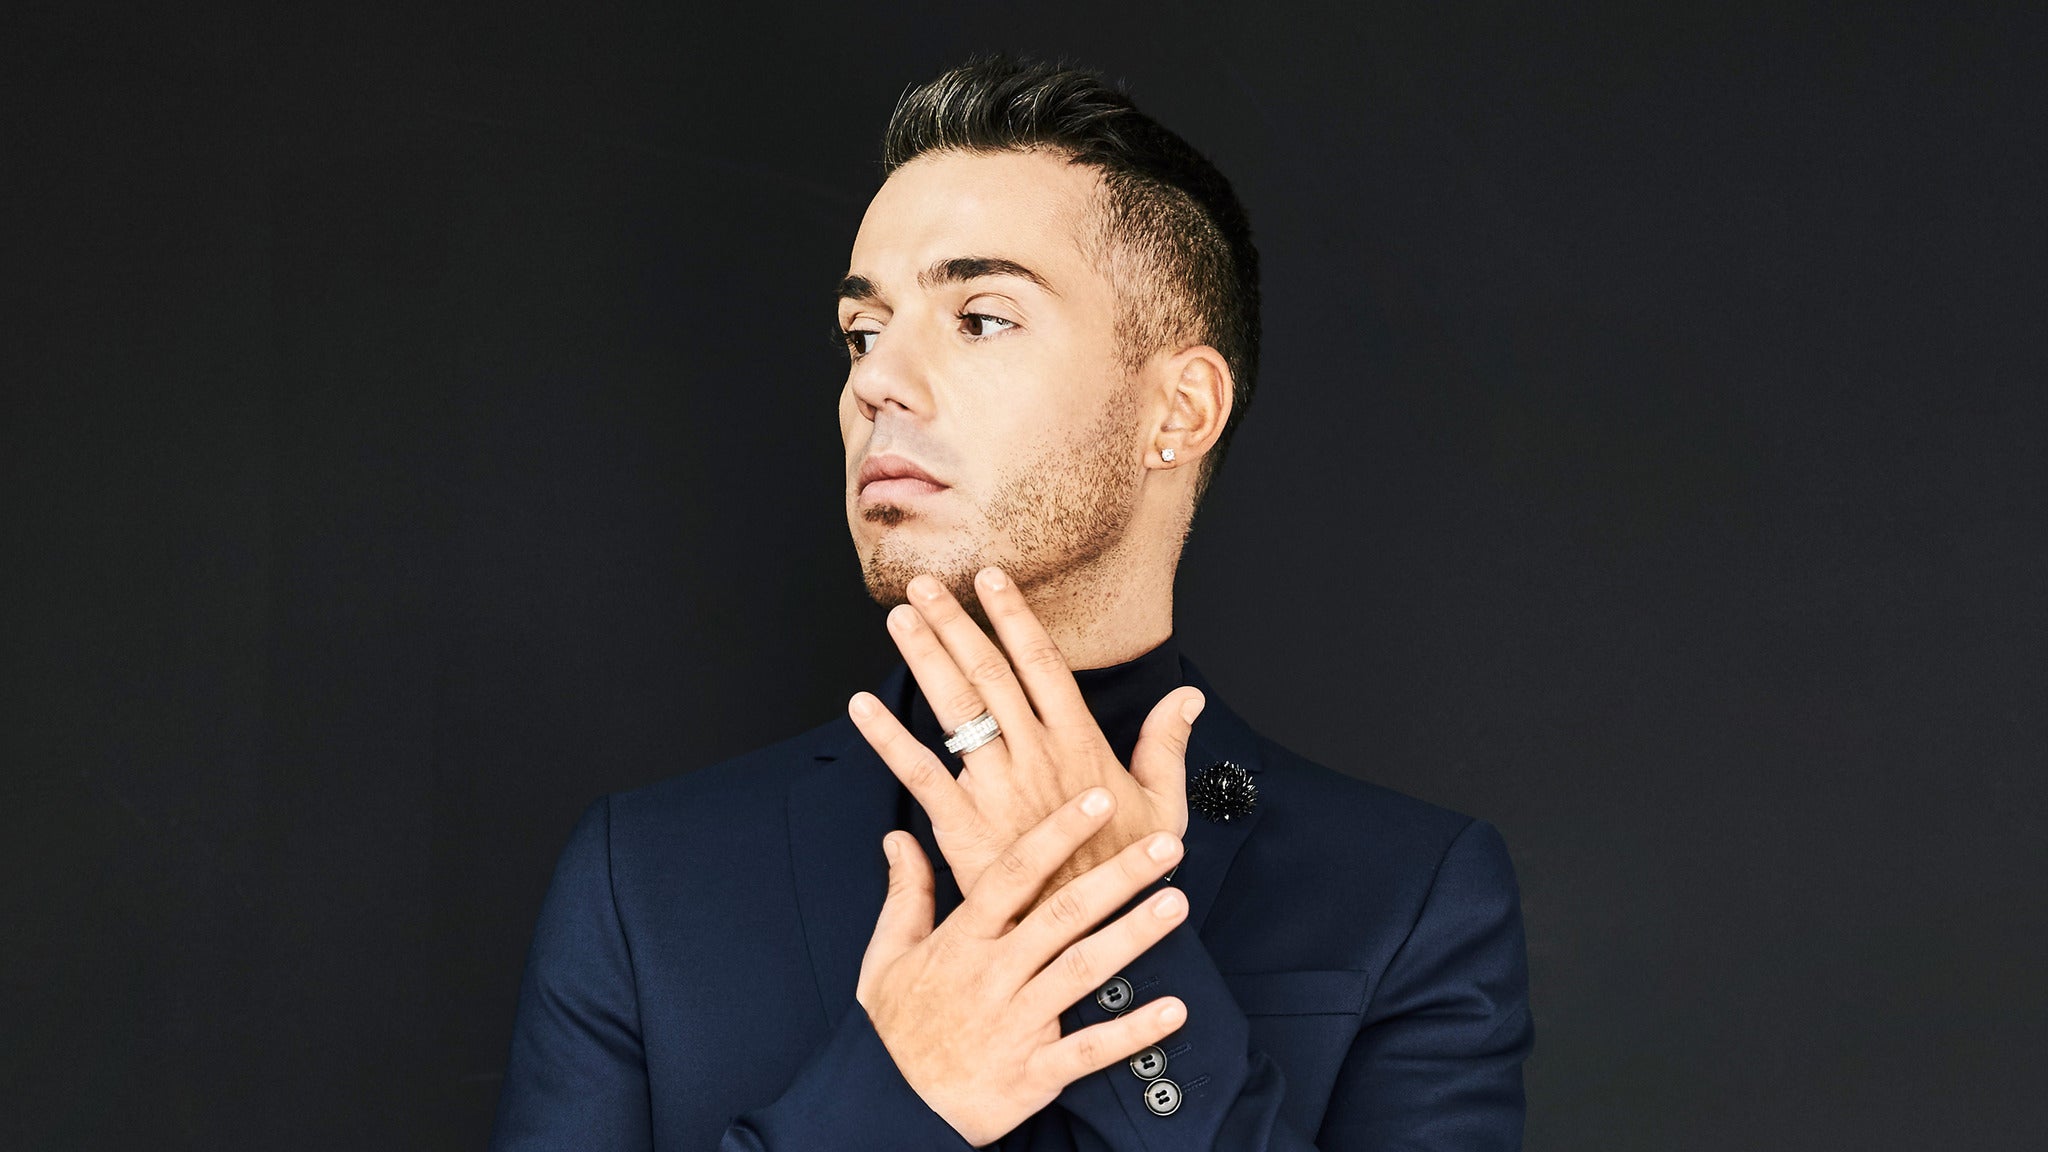 Image used with permission from Ticketmaster | Anthony Callea - FORTYlove tickets